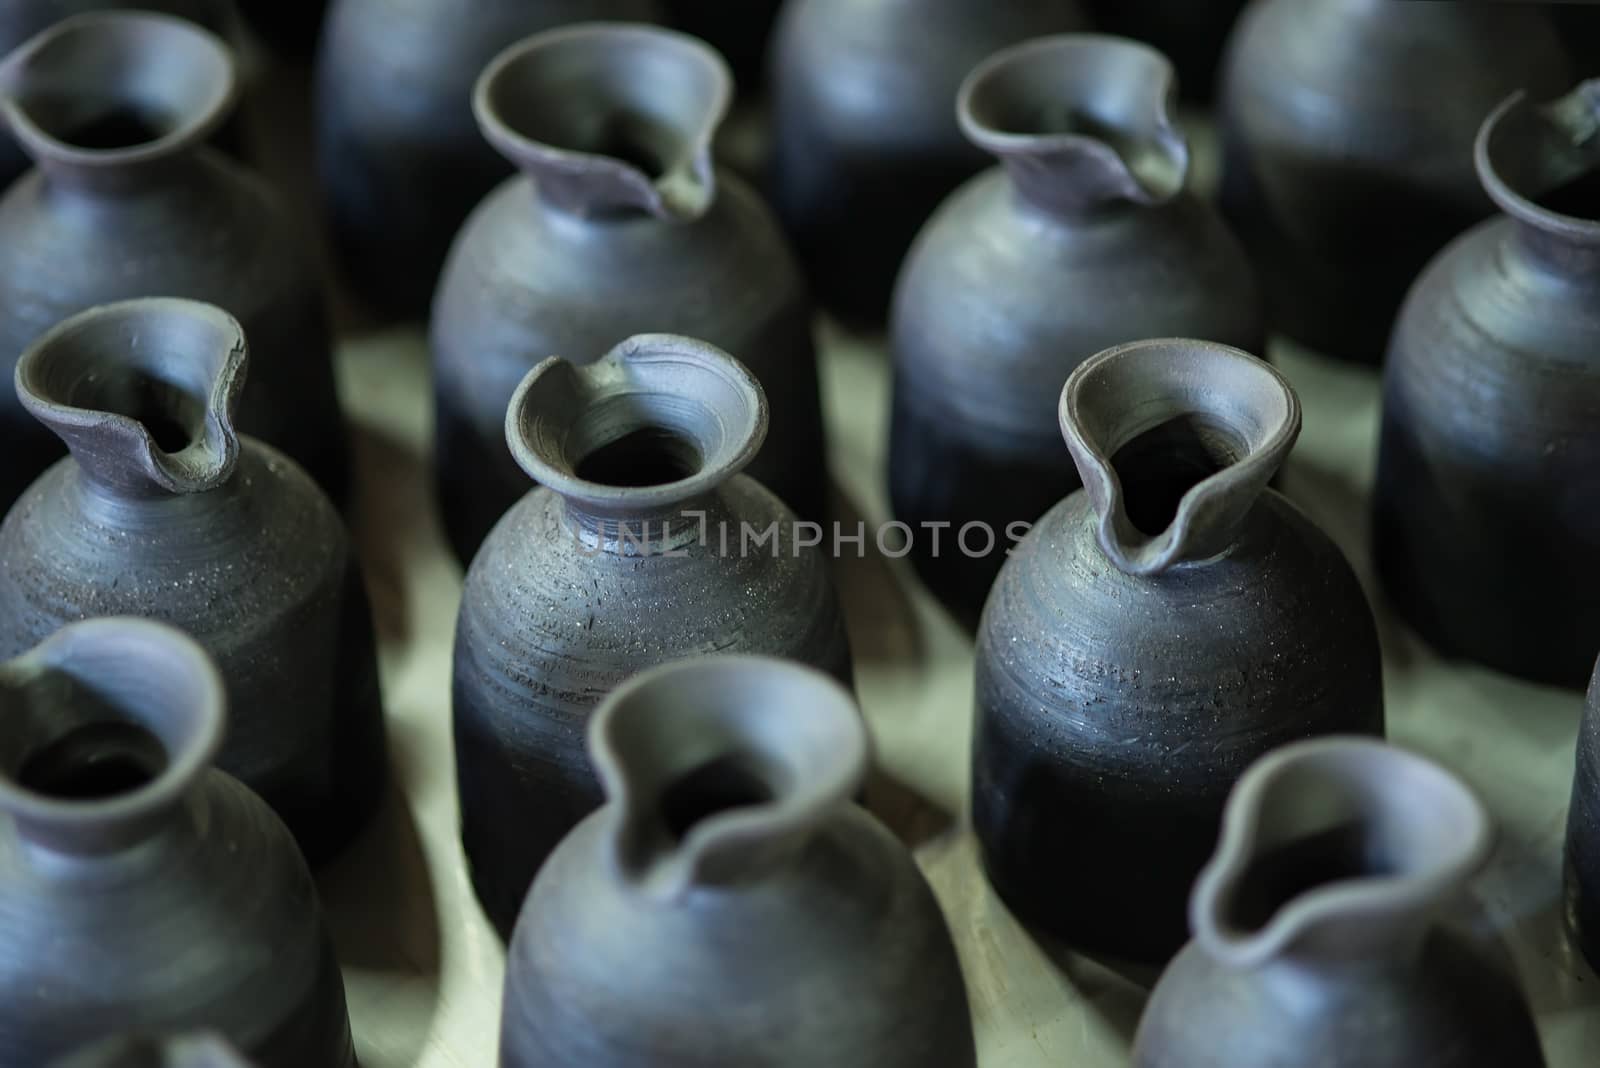 There are many clay pots in the workshop